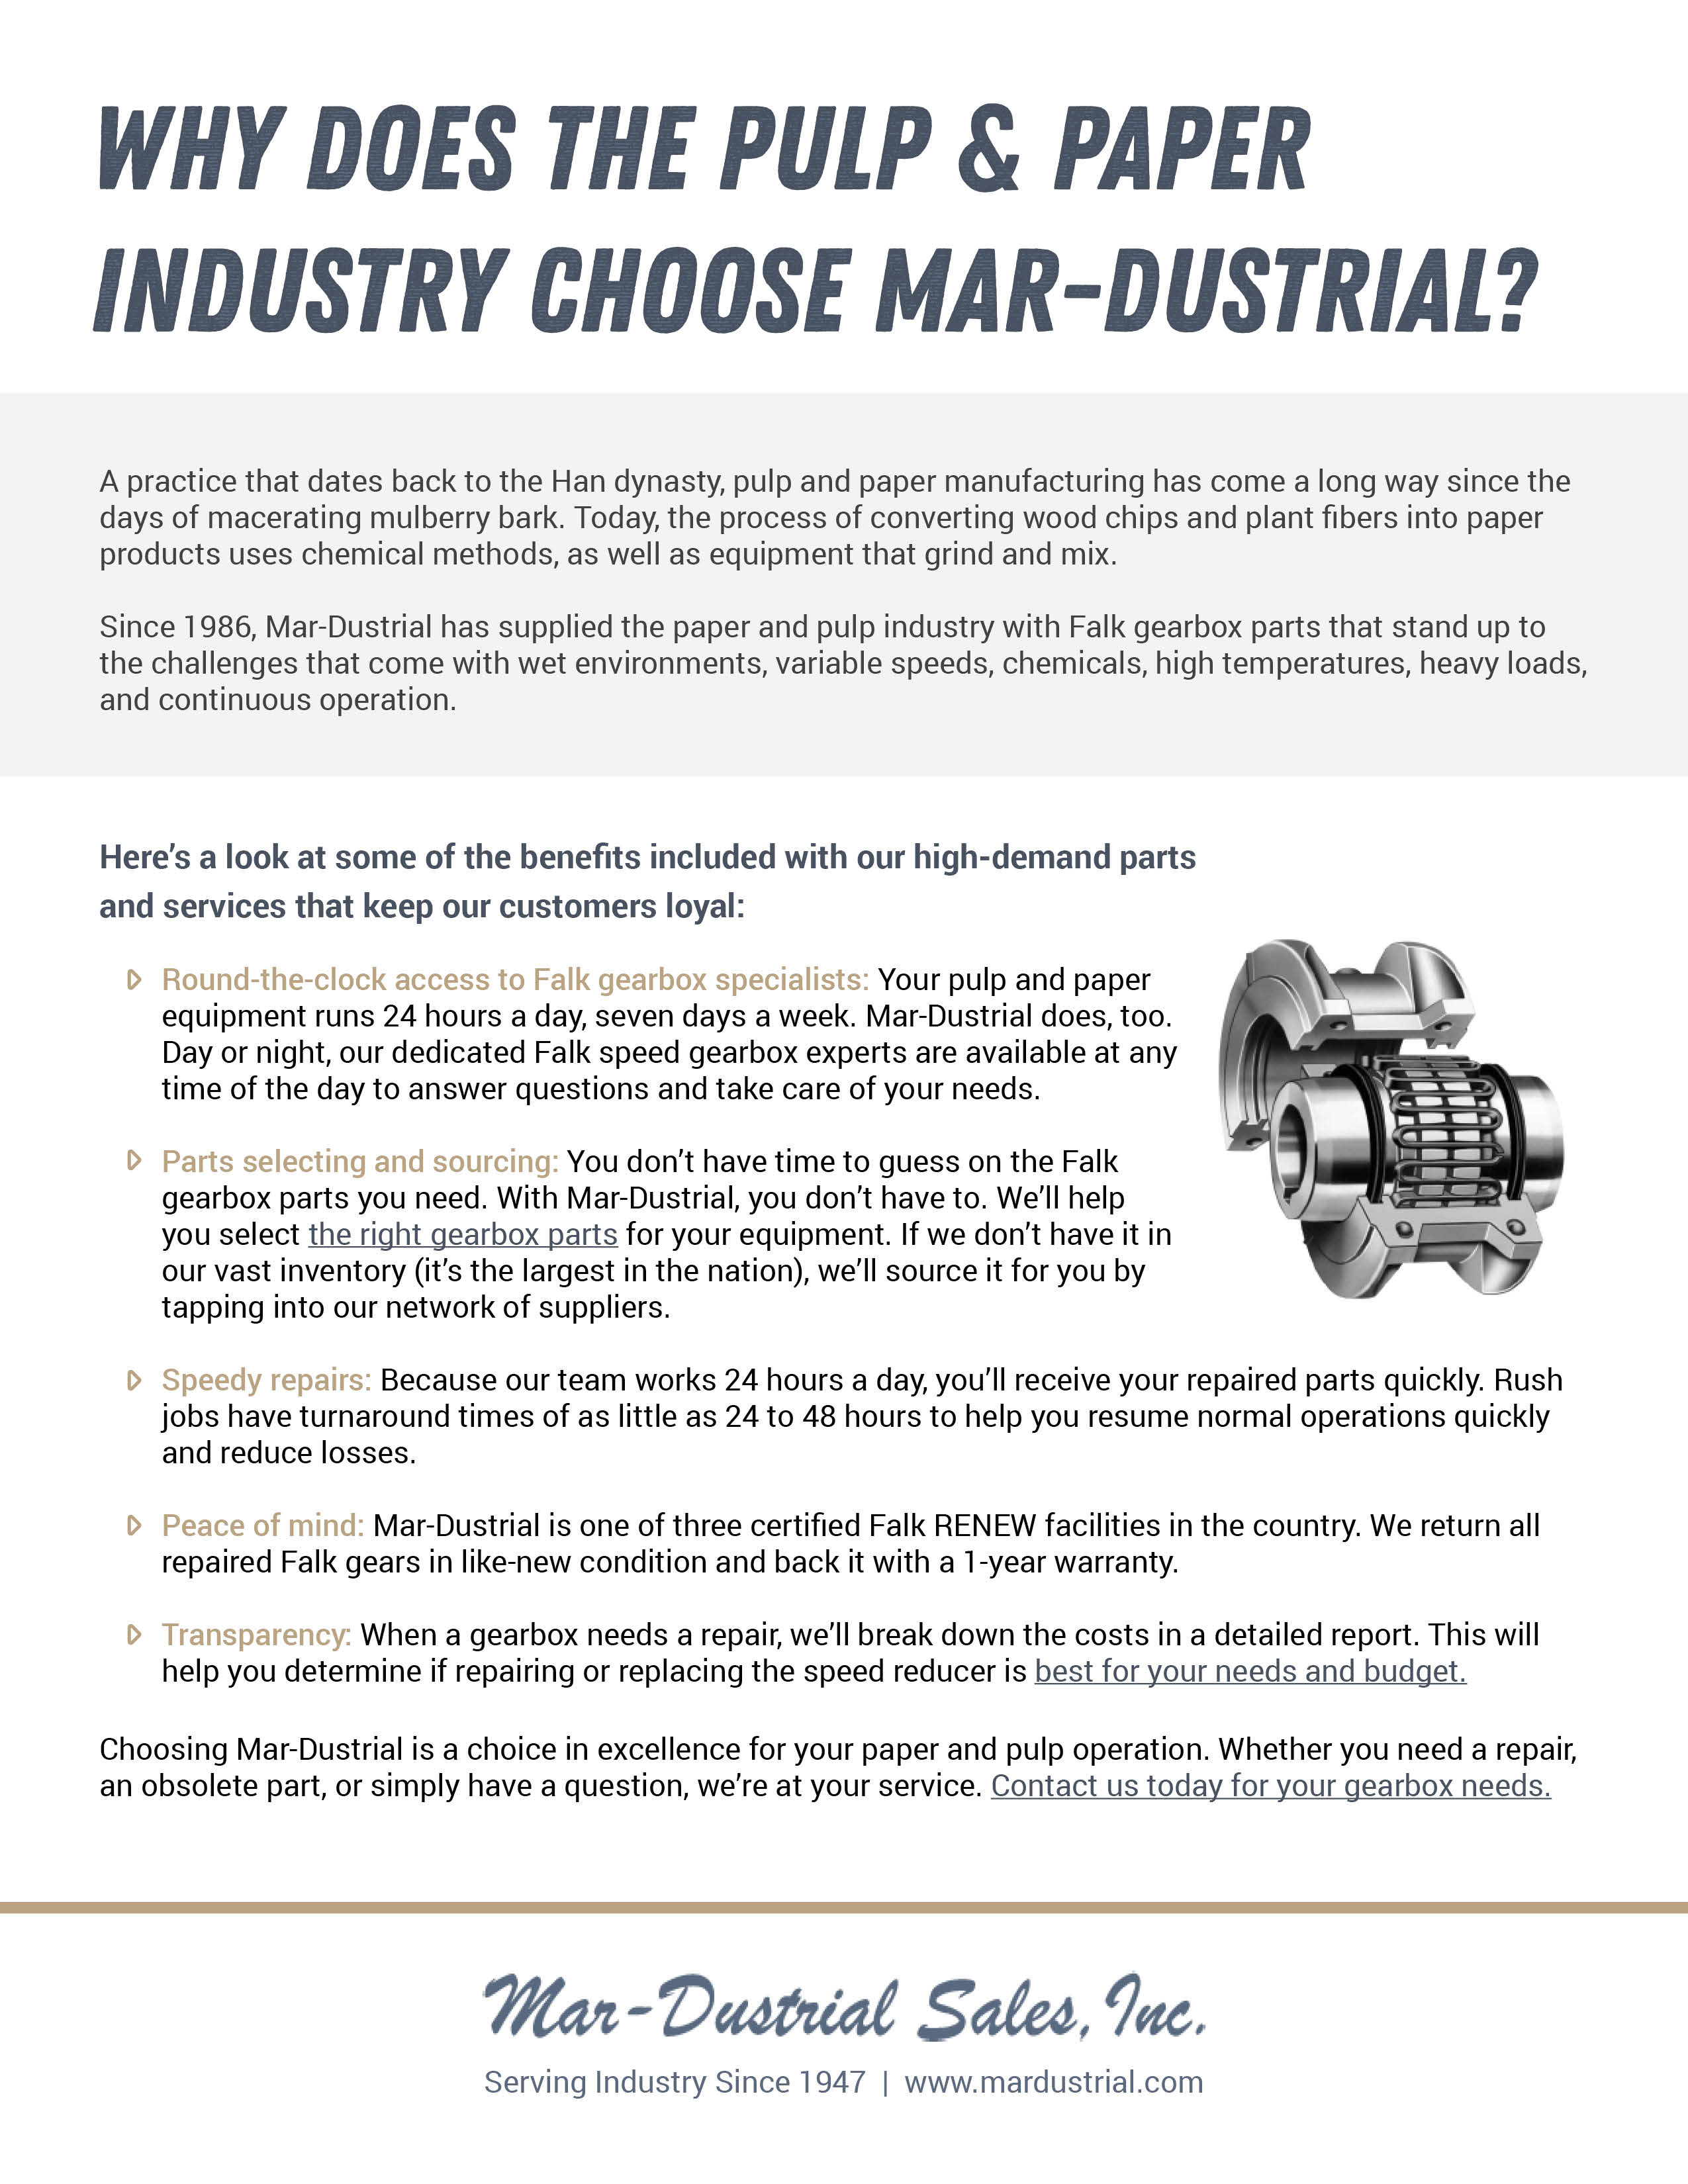 pulp-paper-industry-gearboxes-mardustrial